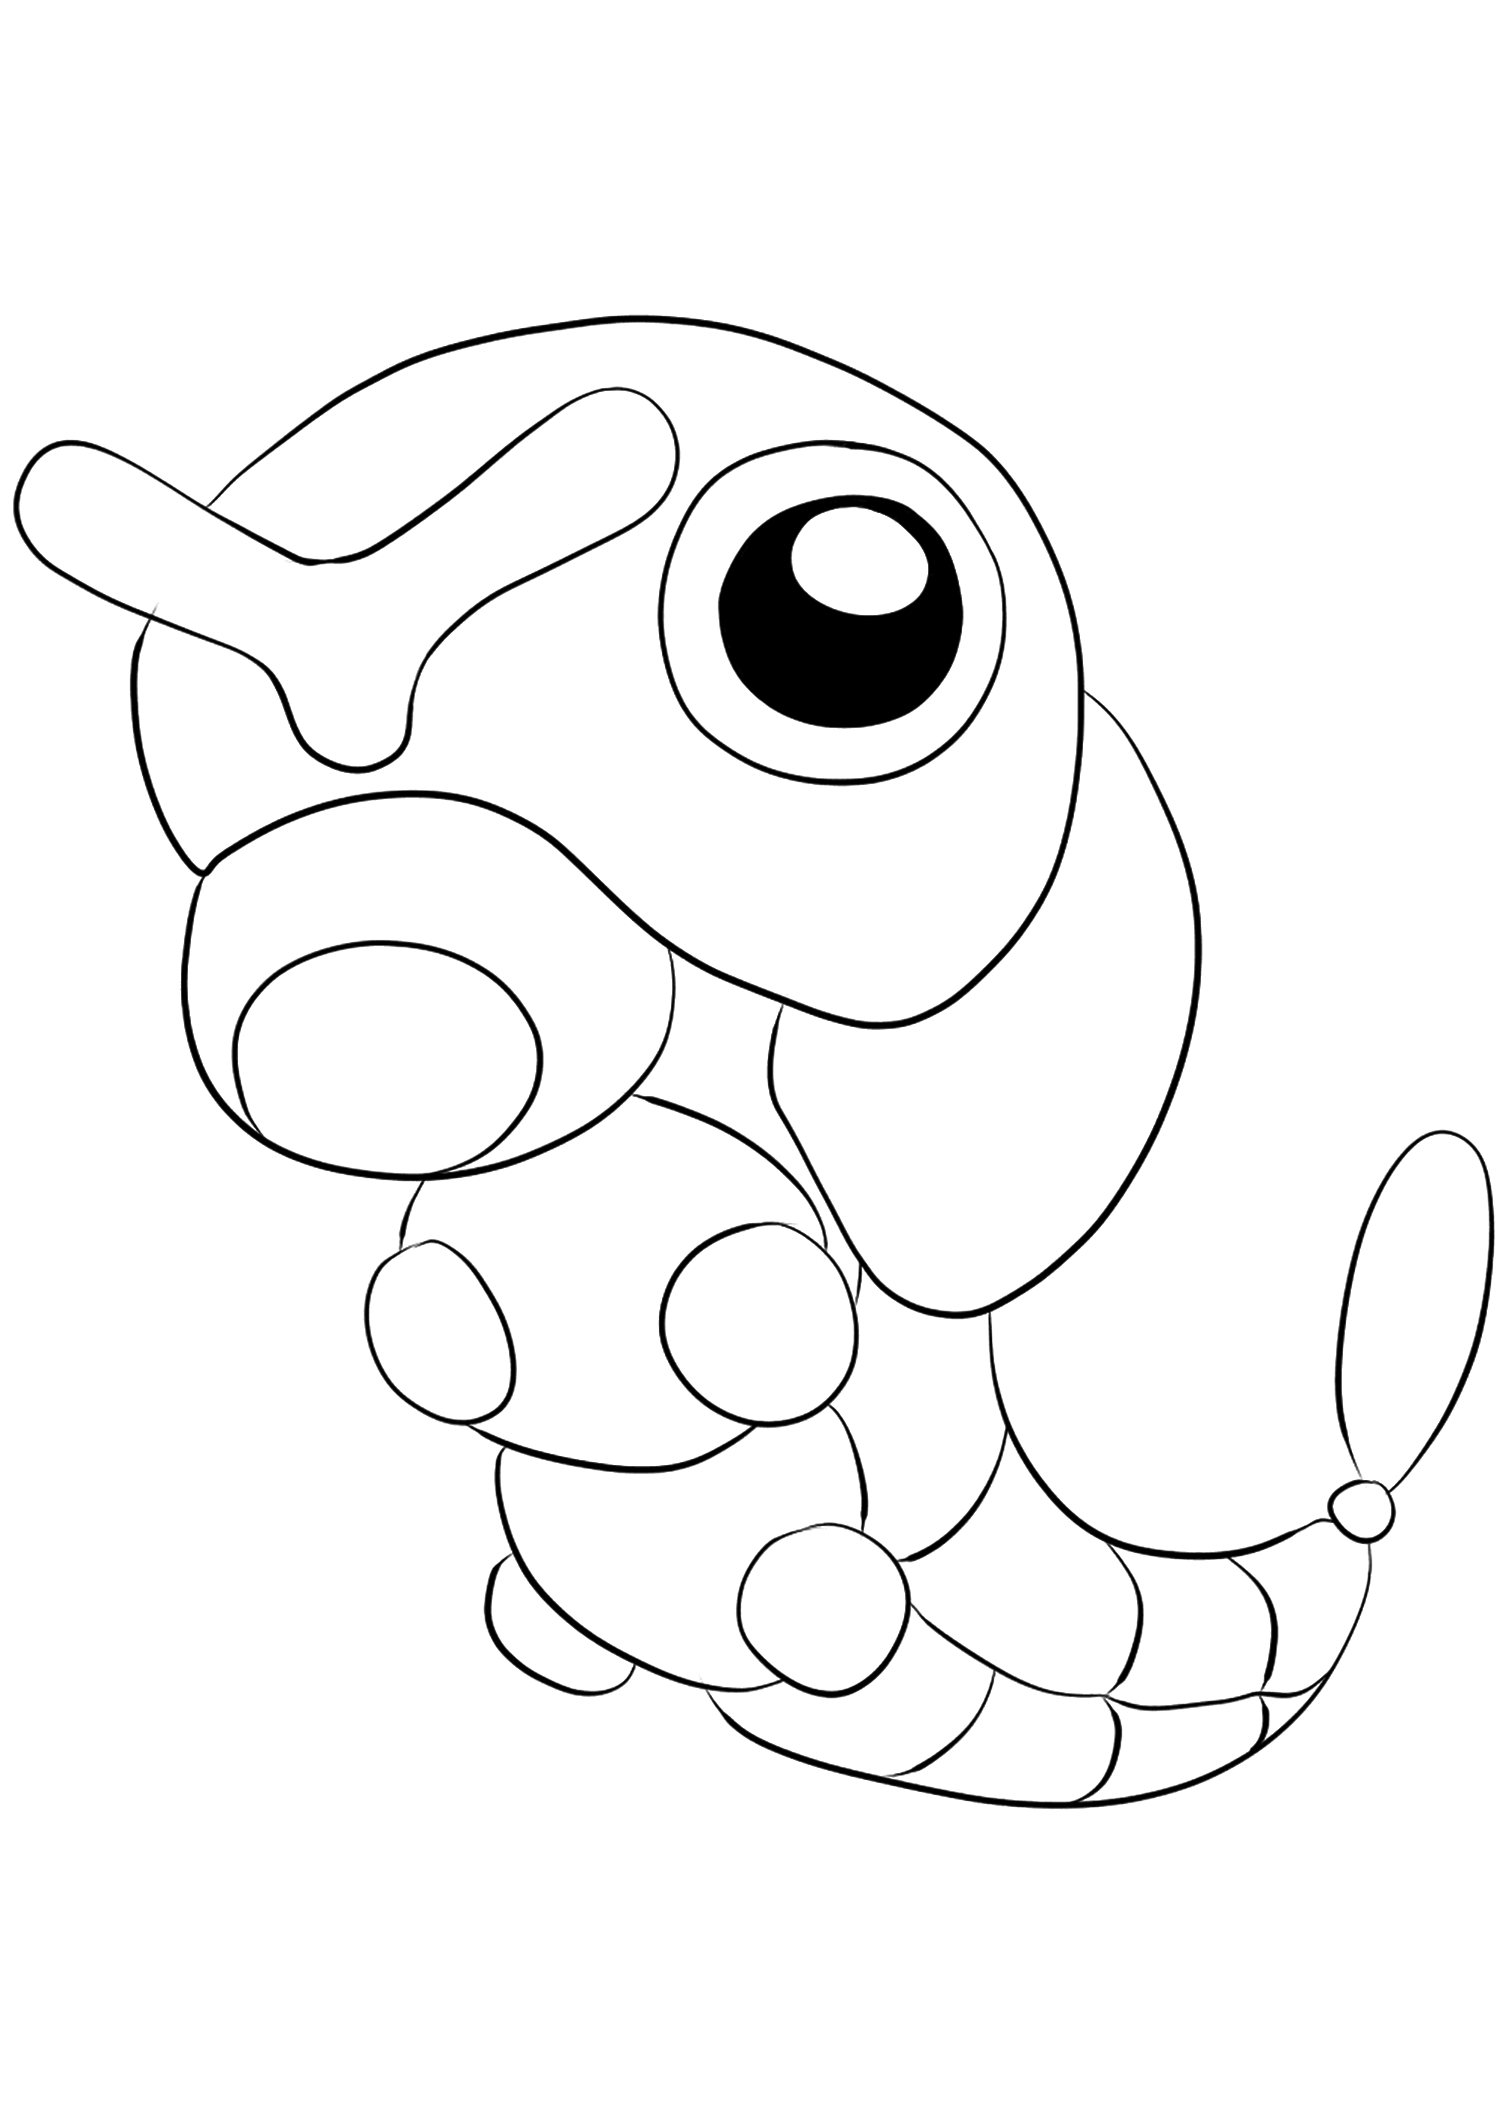 Caterpie No.10 : Pokemon Generation I - All Pokemon coloring pages Kids Coloring  Pages